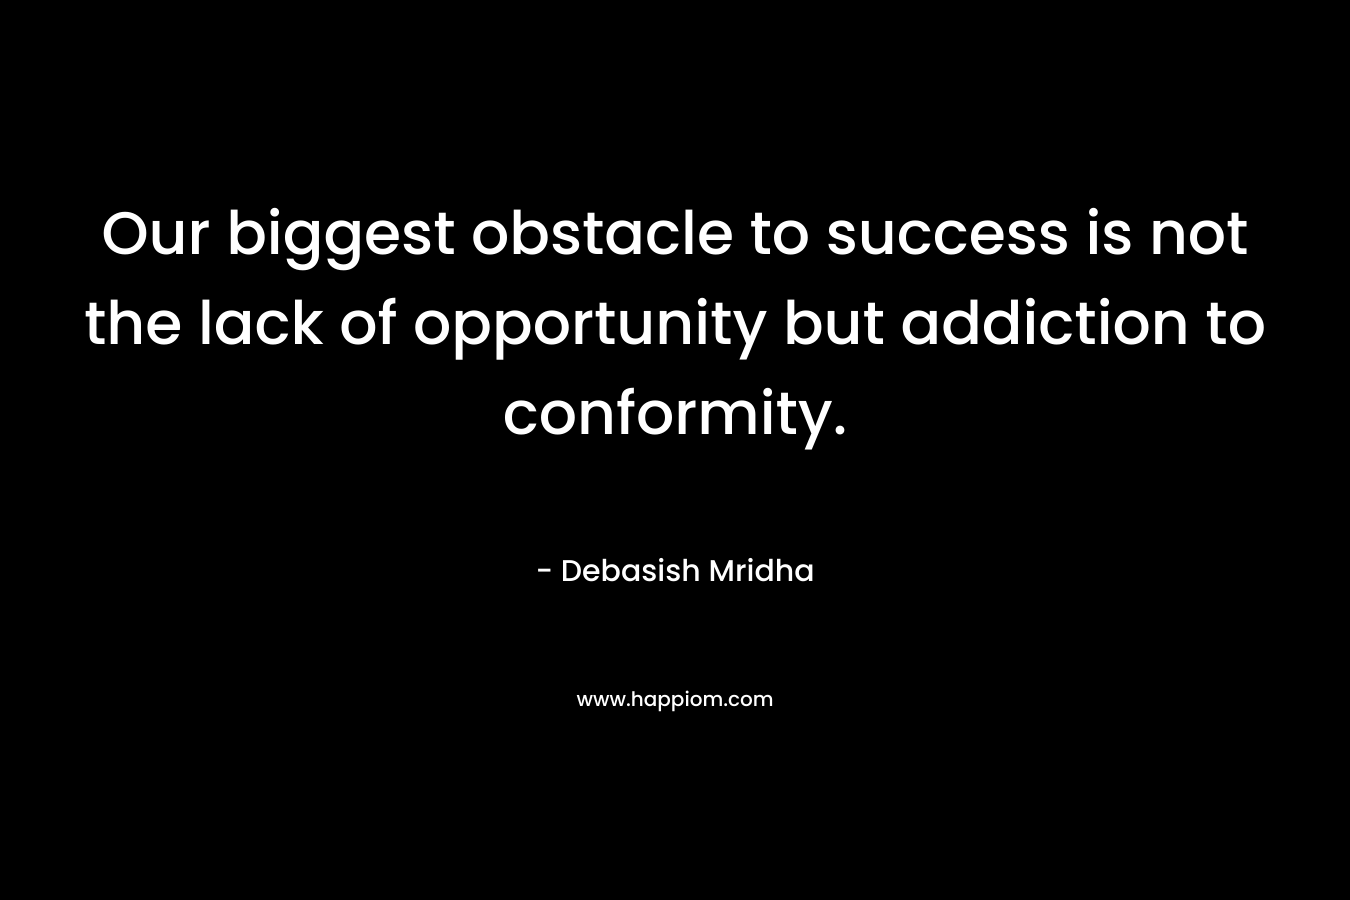 Our biggest obstacle to success is not the lack of opportunity but addiction to conformity.